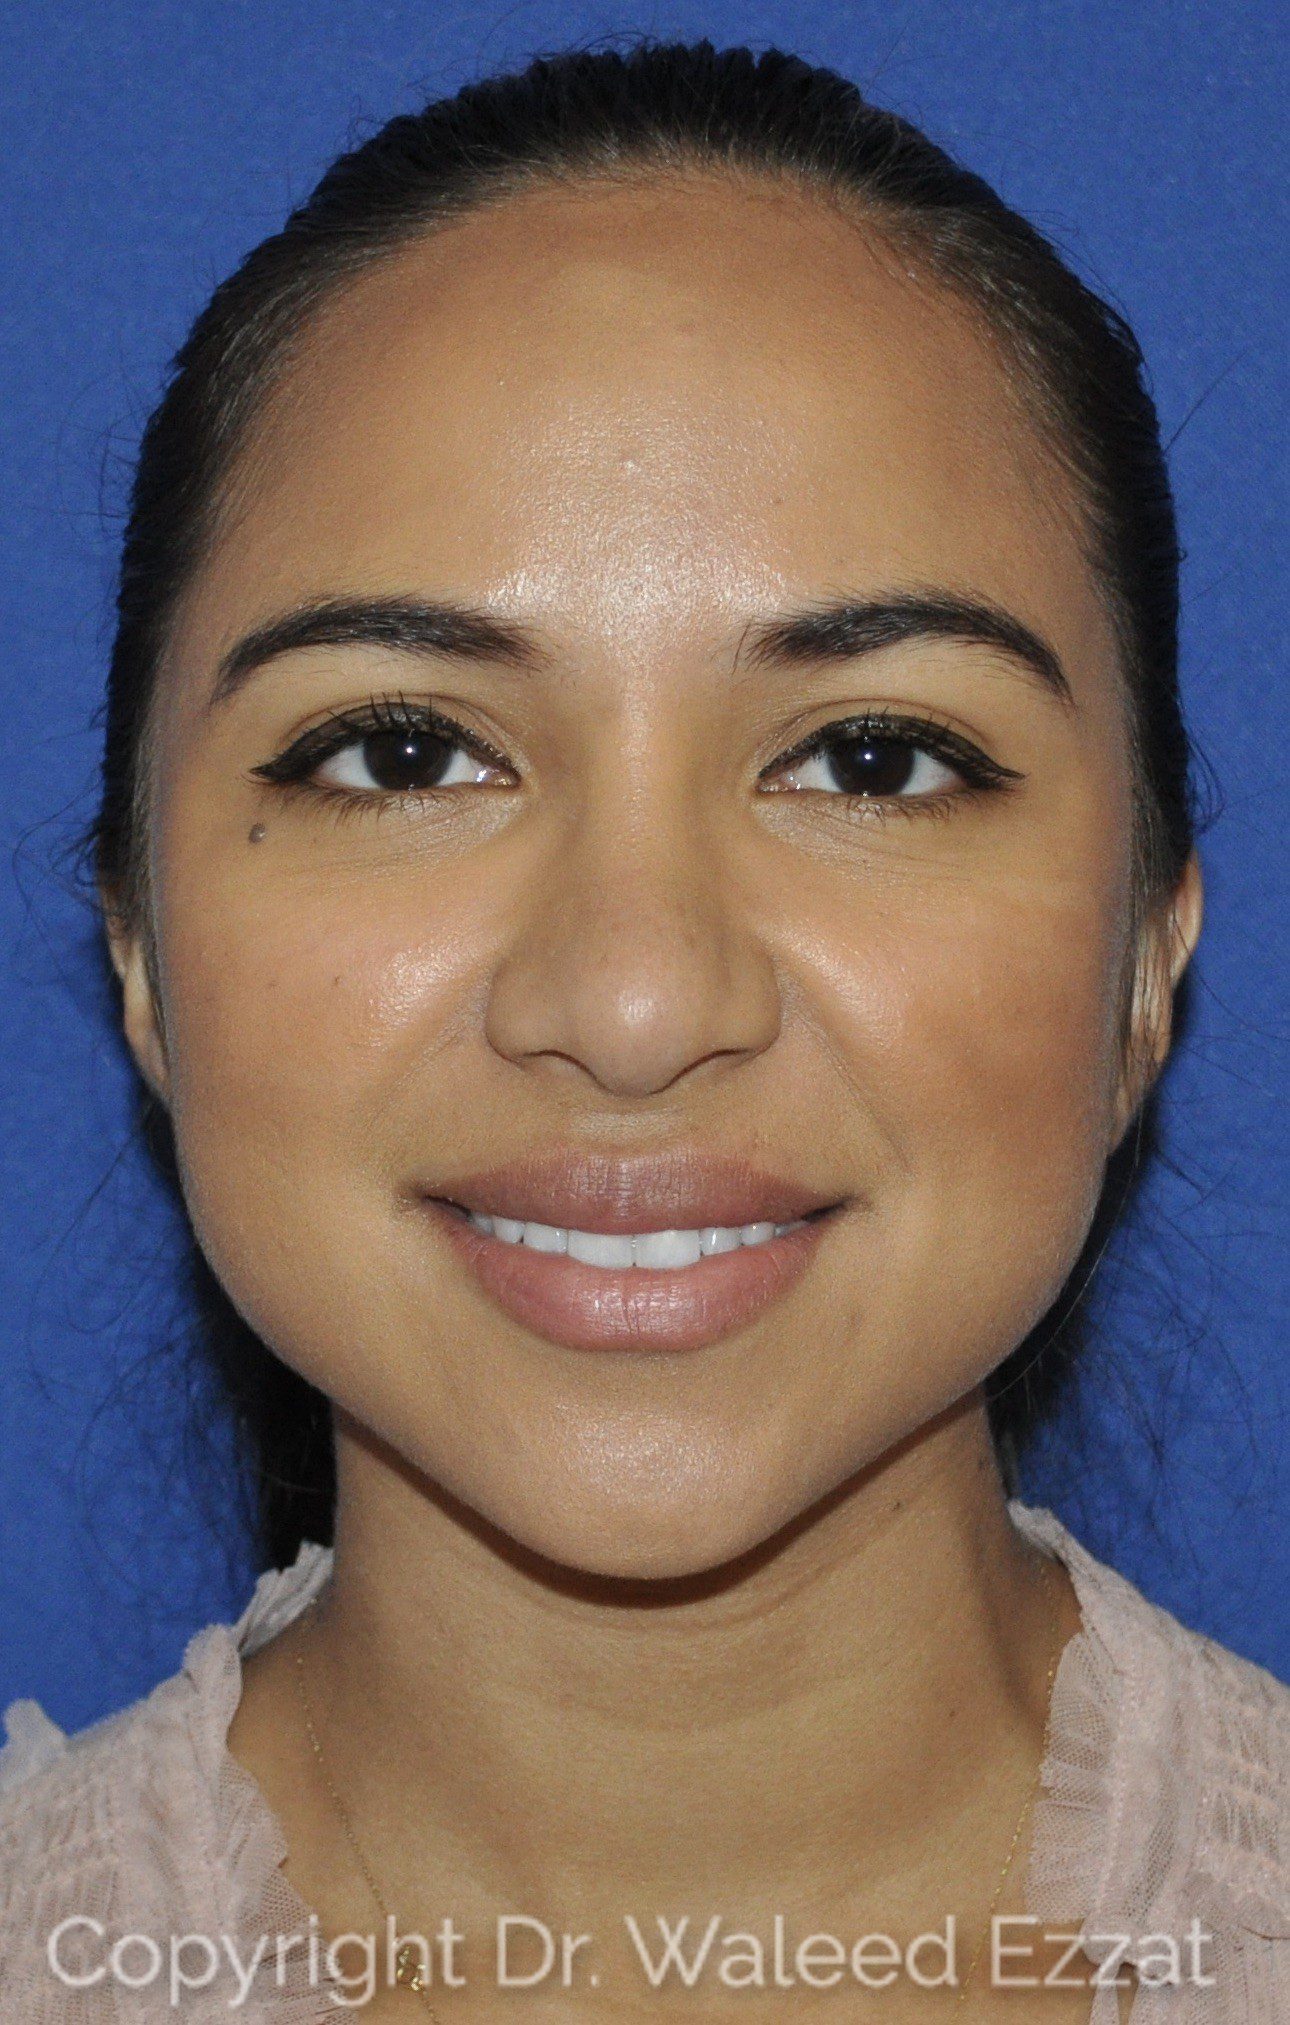 Hispanic/South American Rhinoplasty Patient Photo - Case 21-2 - after view-2